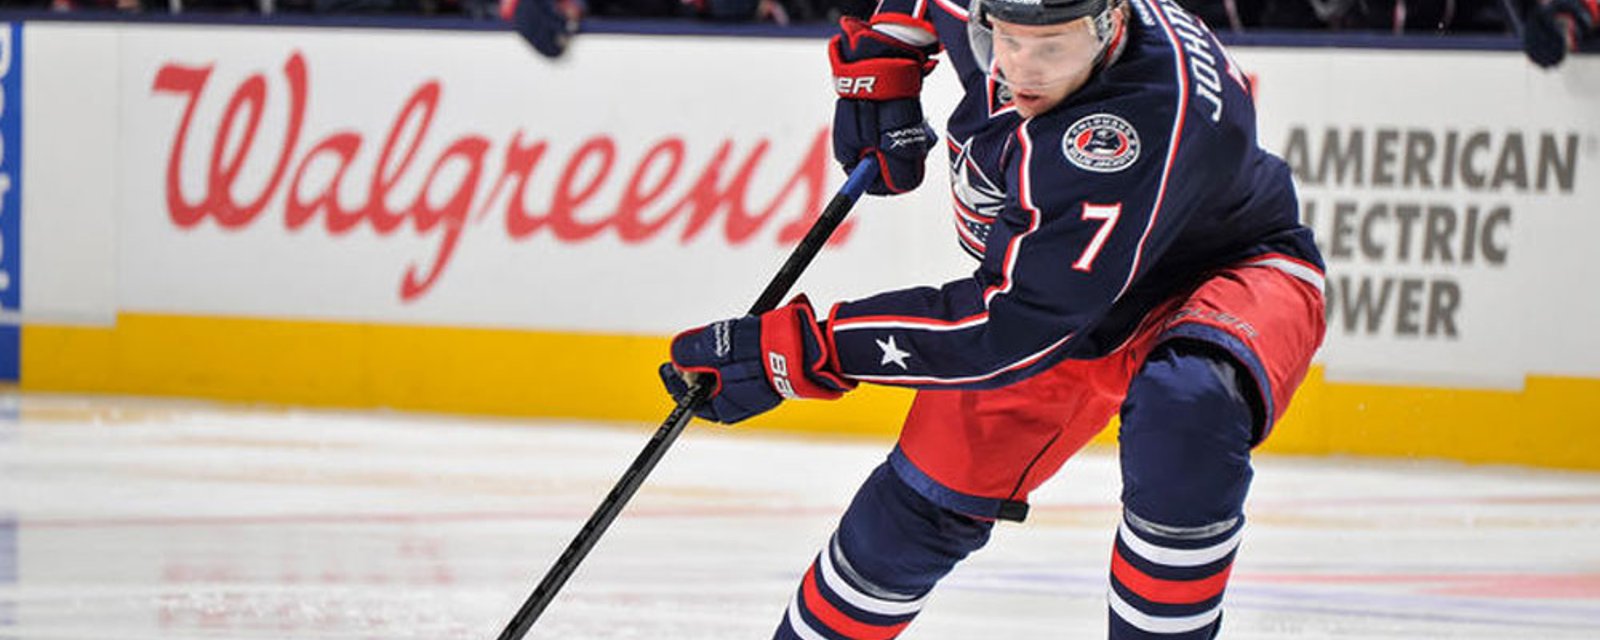 Former NHL scout issues a huge warning to teams hoping to acquire Jack Johnson!